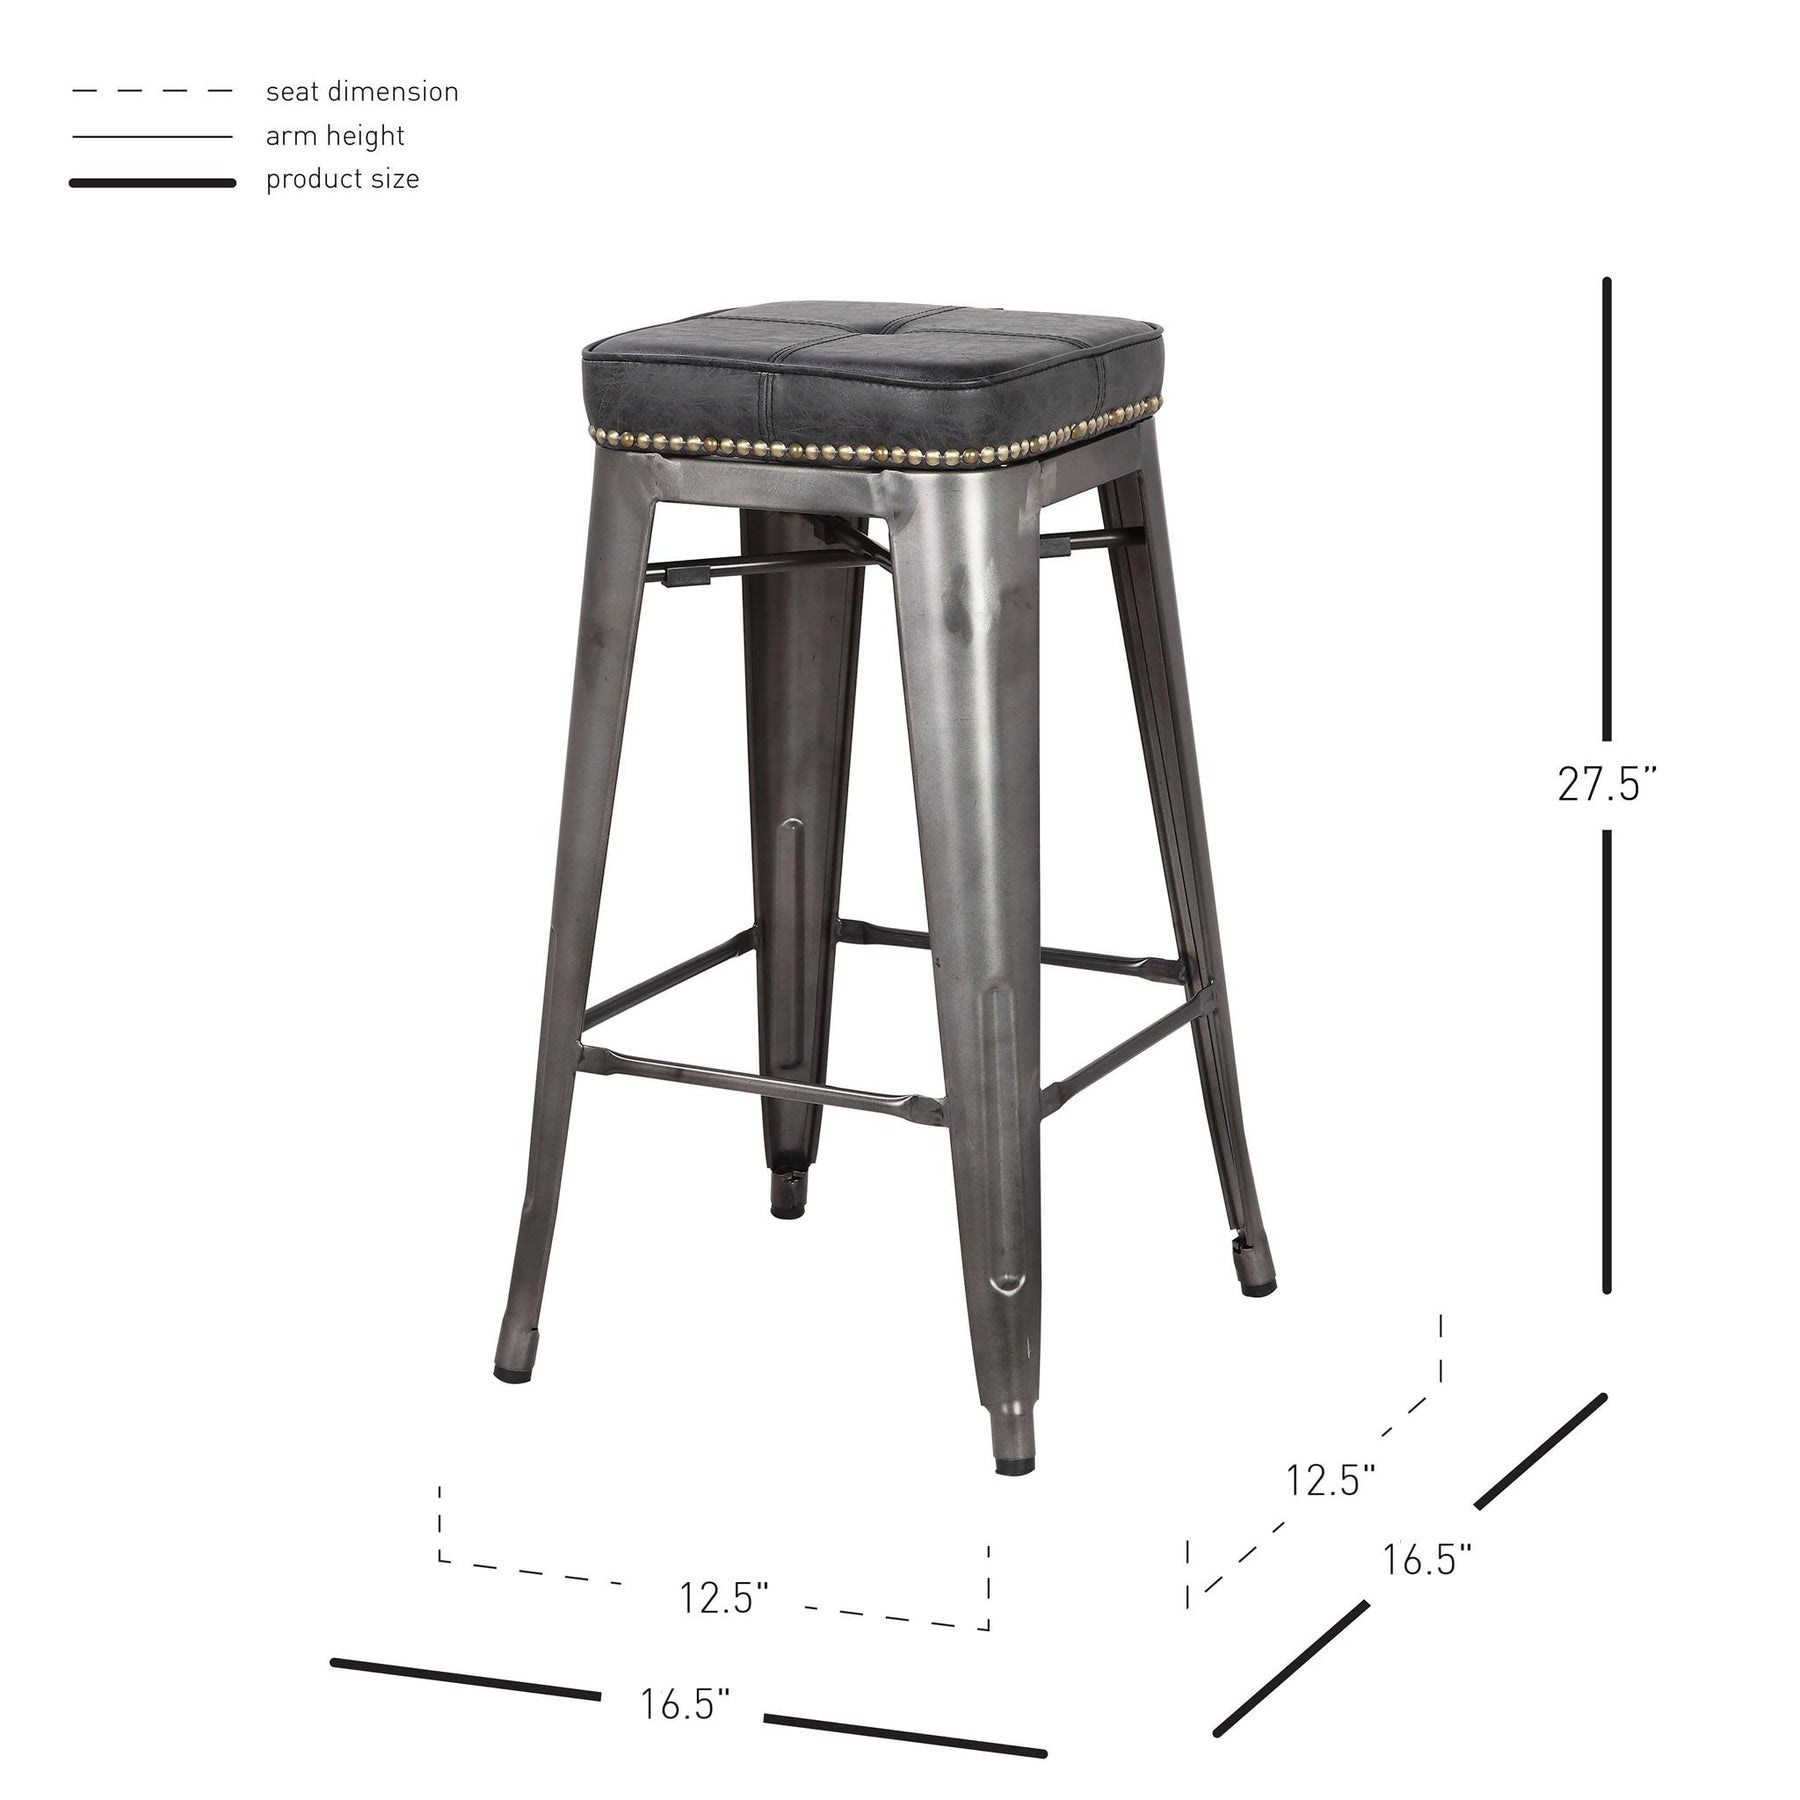 Metropolis PU Metal Counter Stool (Set of 4) by New Pacific Direct - 9300028